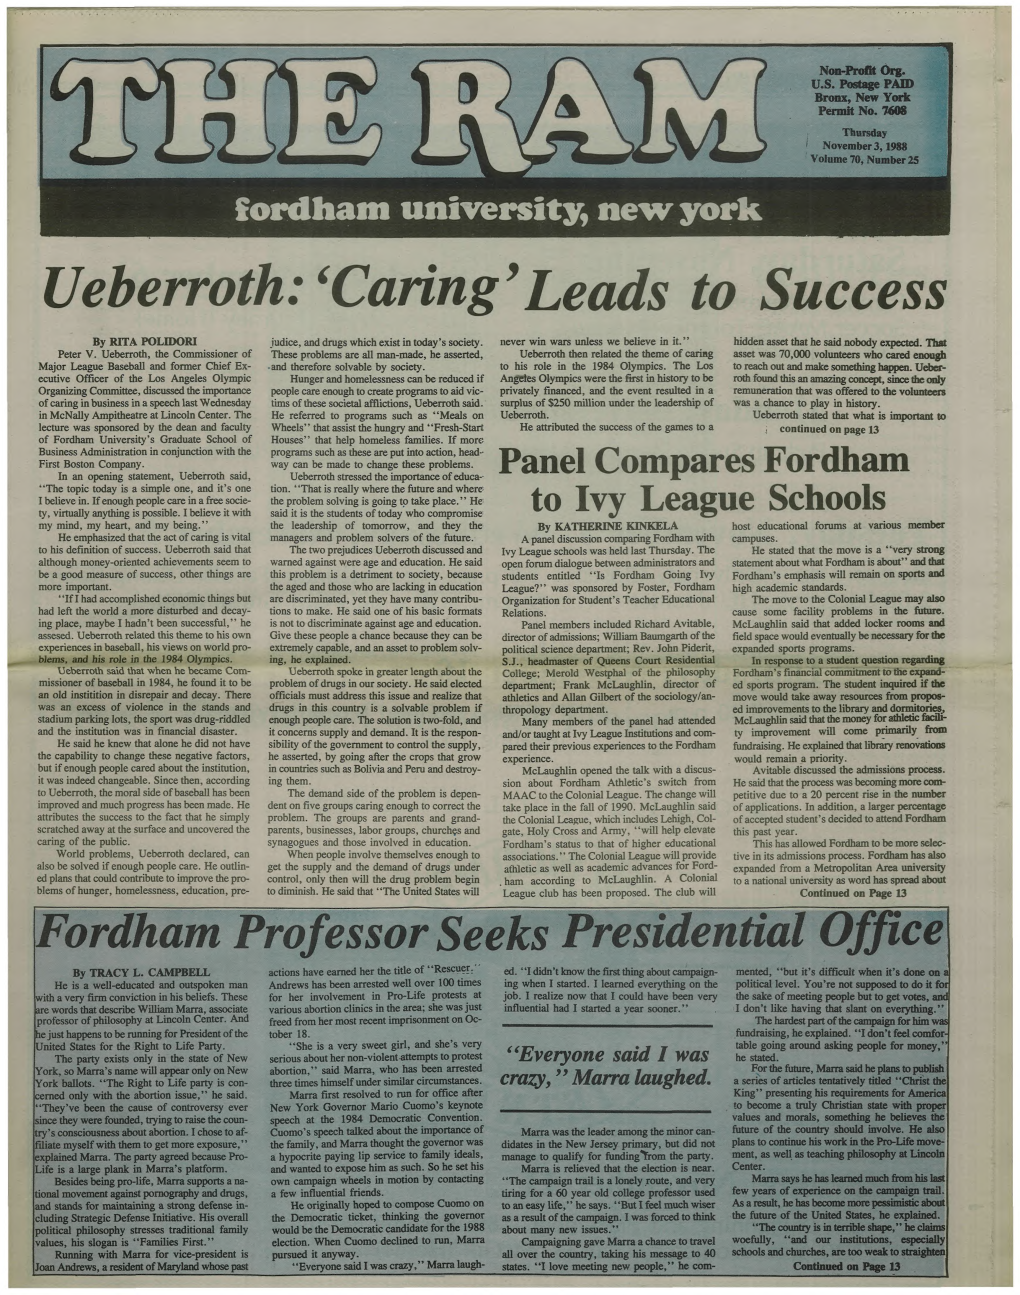 Ueberroth:'Caring'leads to Success